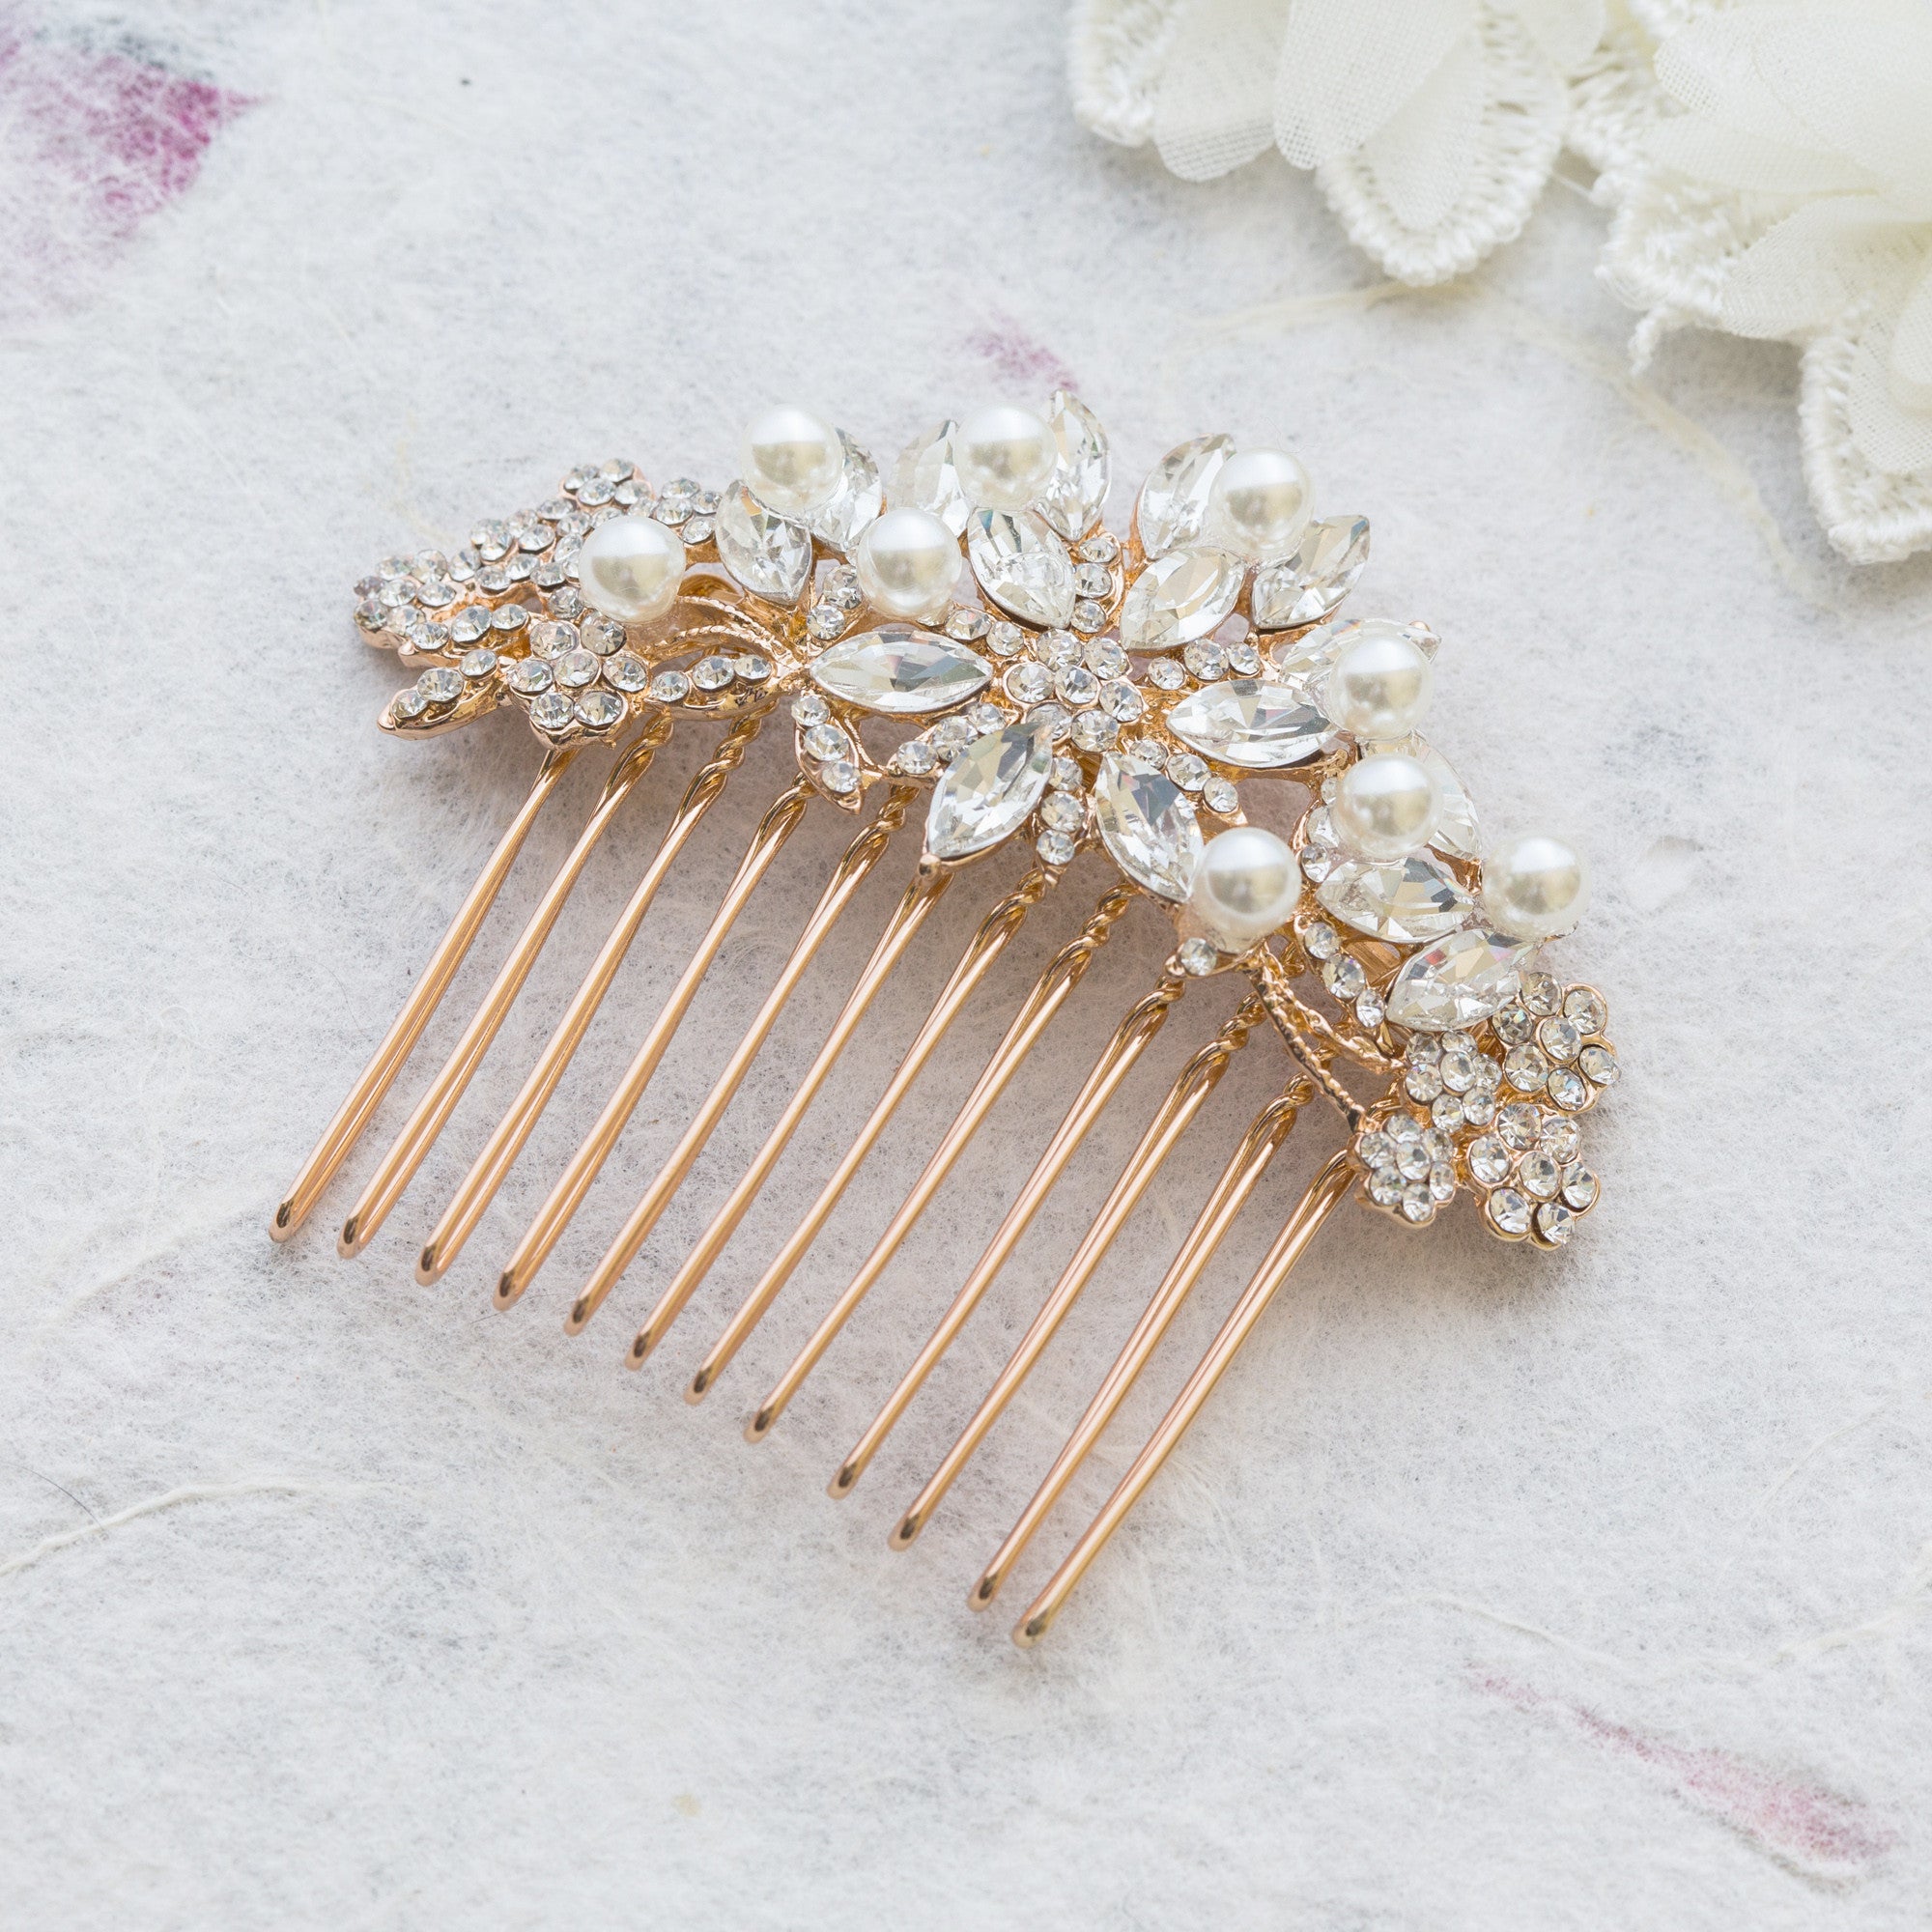 Bette crystal and pearl hair comb